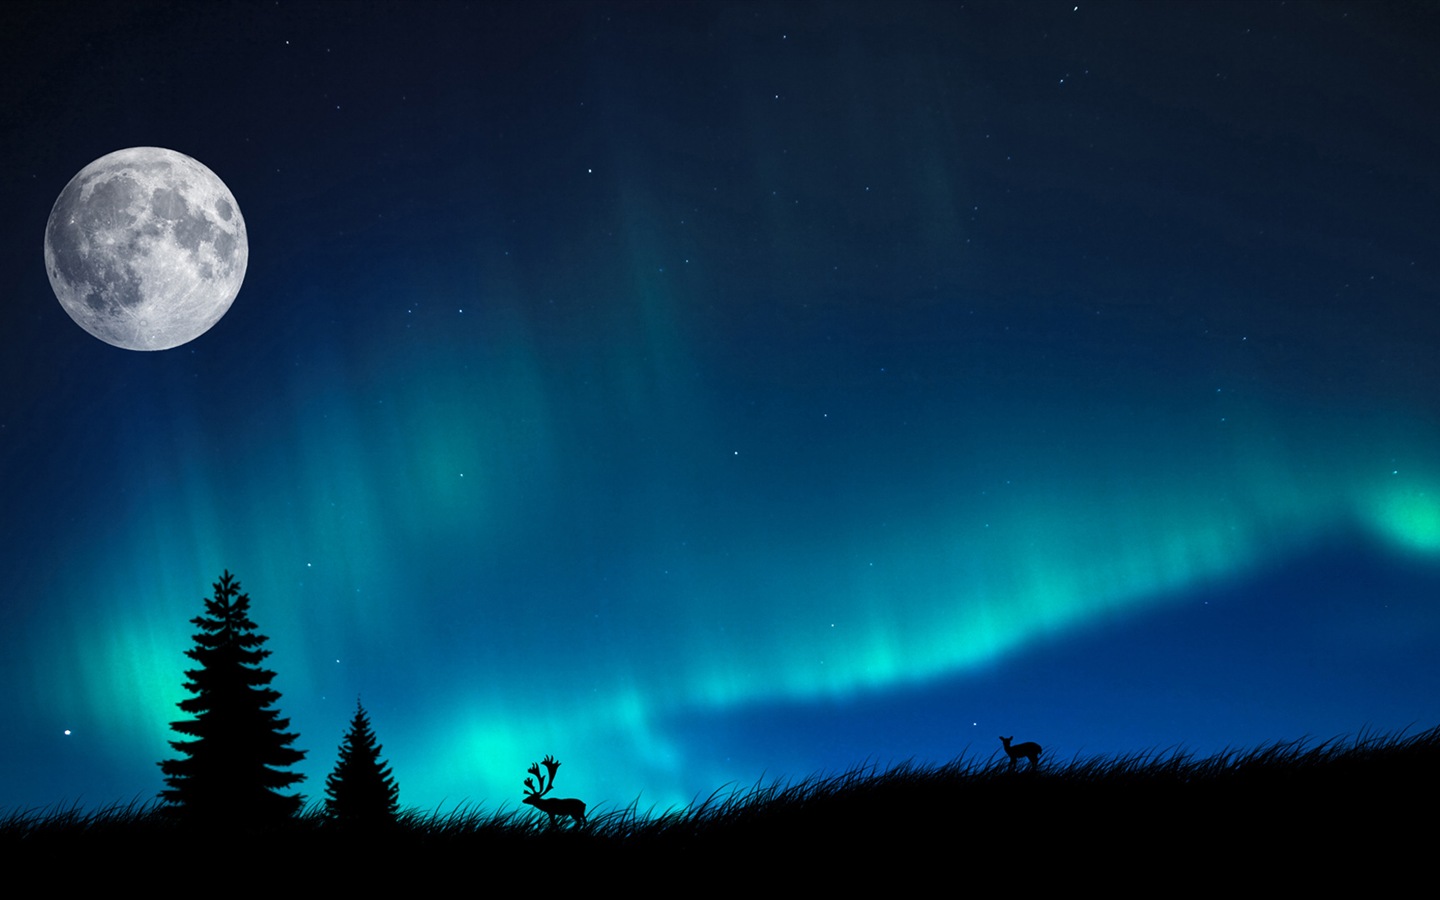 Natural wonders of the Northern Lights HD Wallpaper (1) #13 - 1440x900